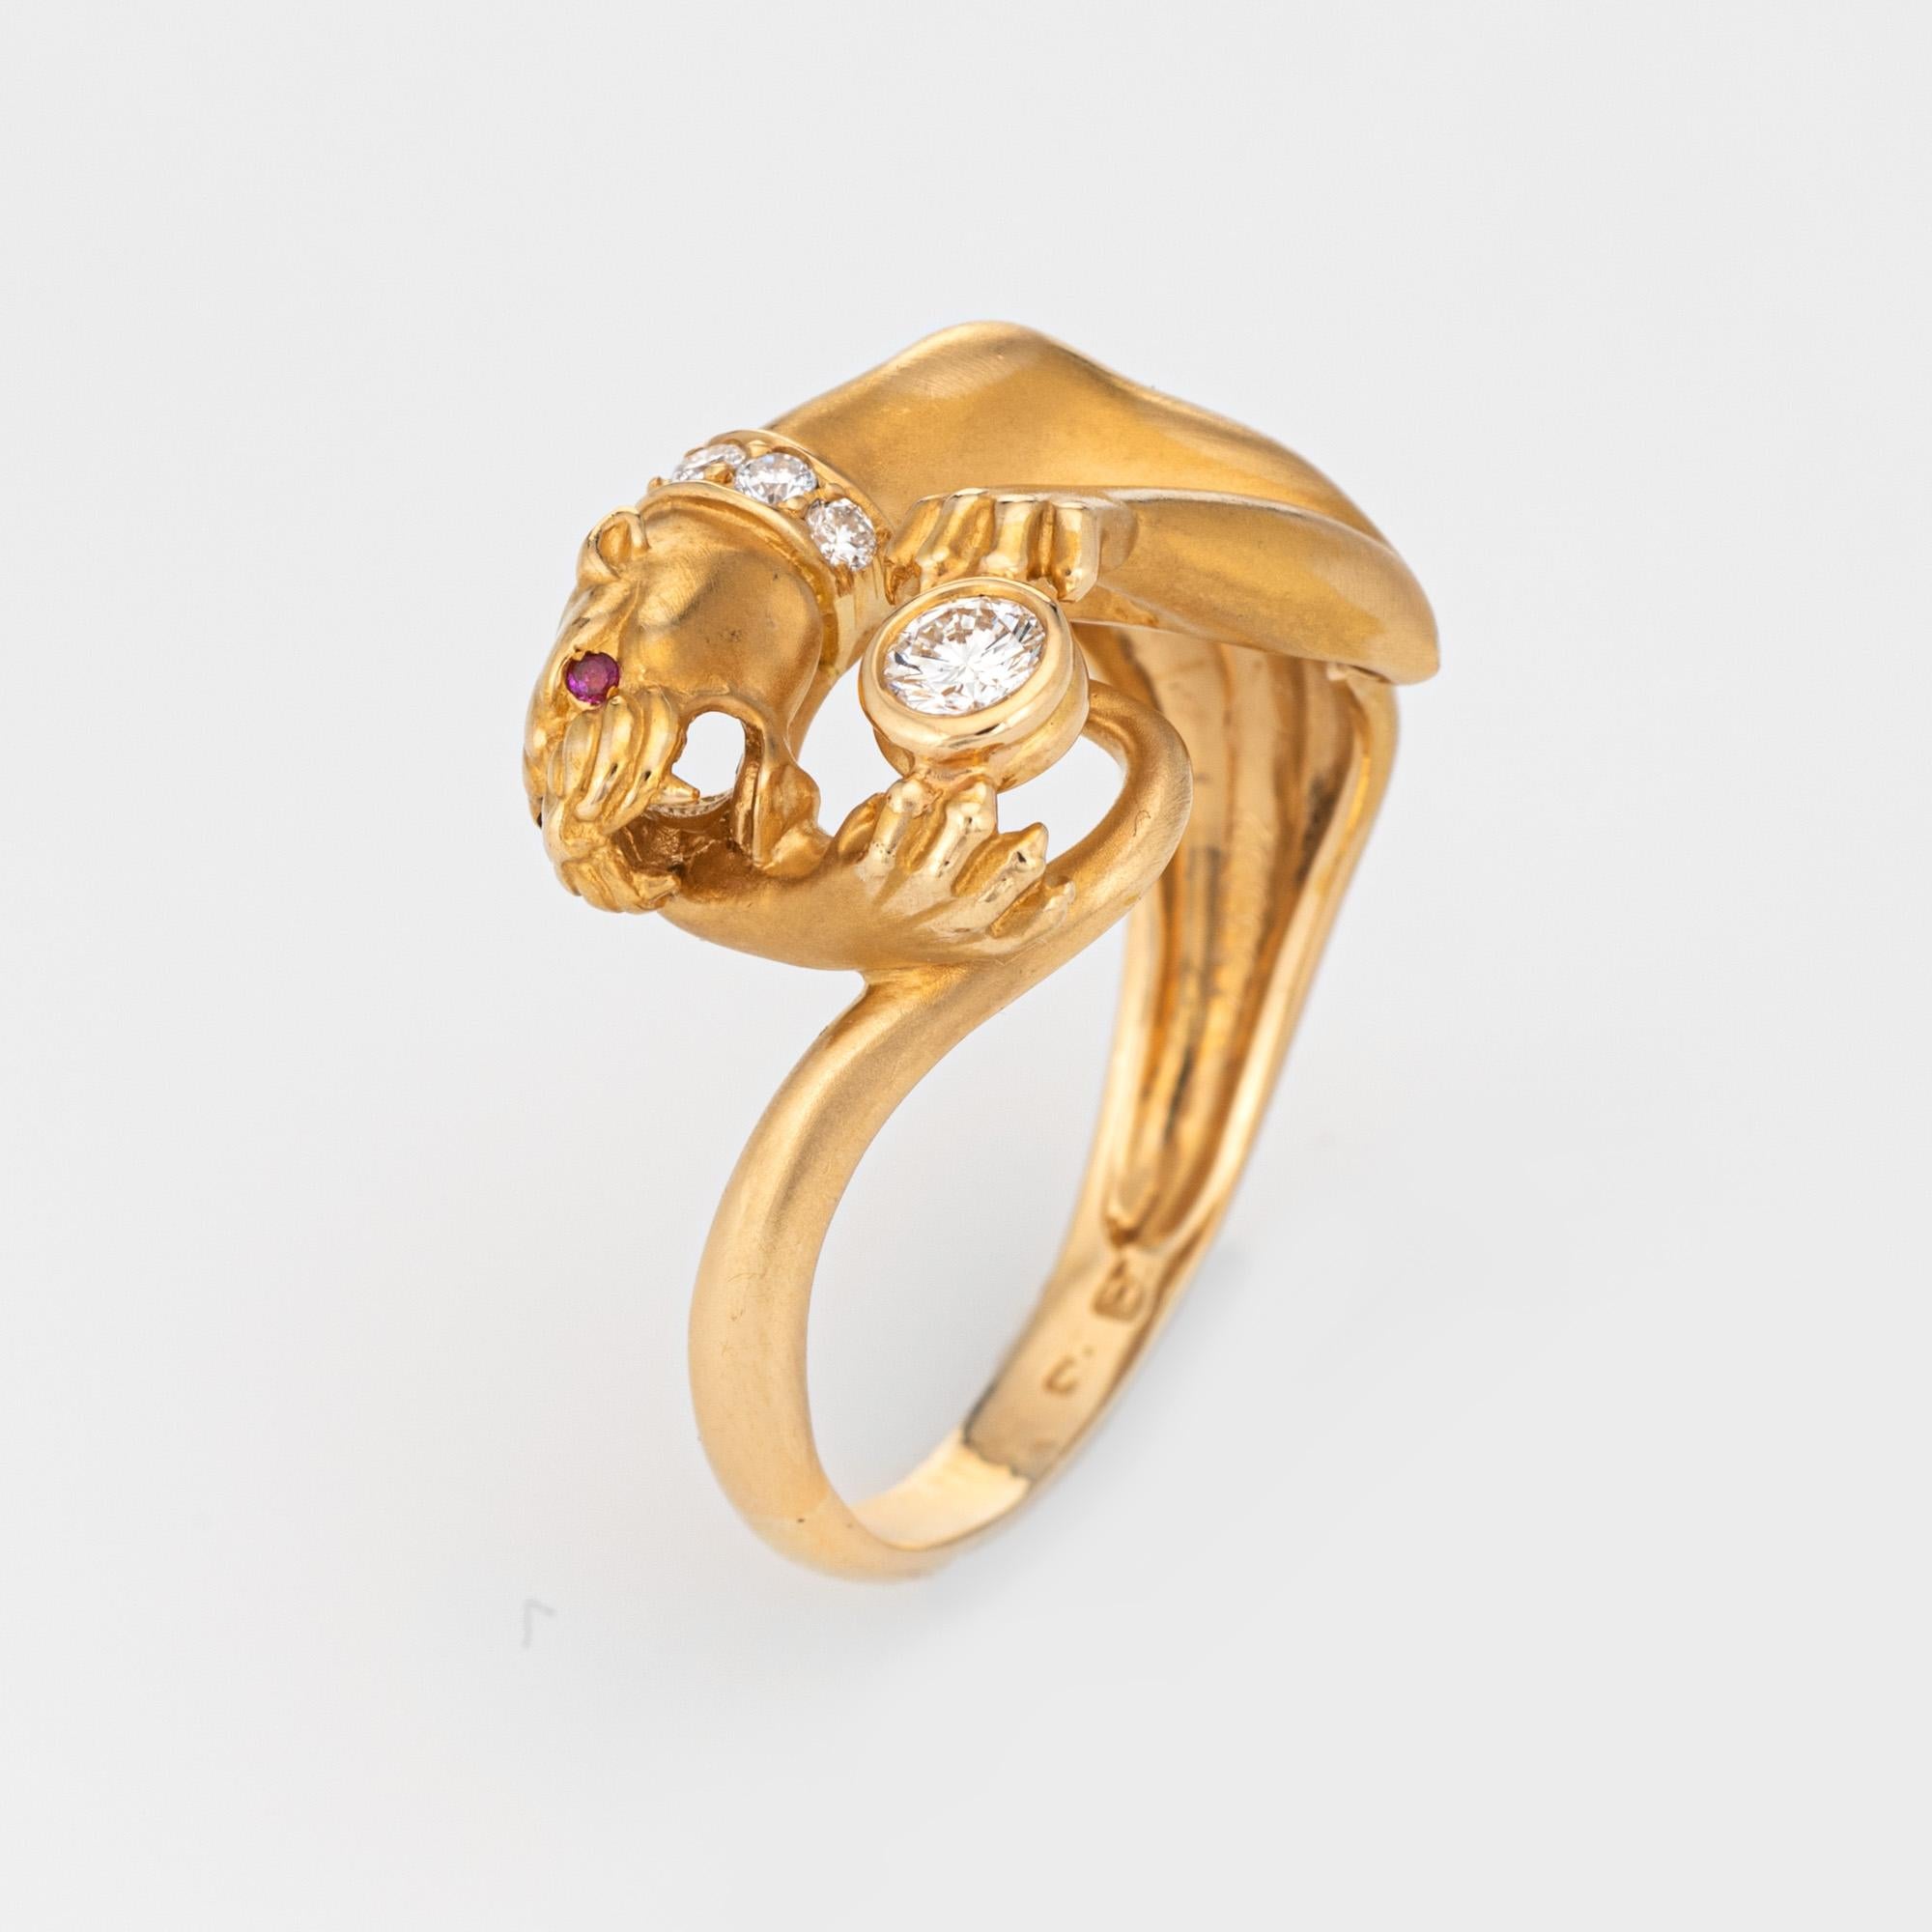 Stylish estate Carrera y Carrera diamond panther ring crafted in 18k yellow gold. 

One diamond is estimated at 0.15 carats, accented four diamonds estimated 0.02 carat diamonds. The total diamond weight is estimated at 0.23 carats (estimated at G-H